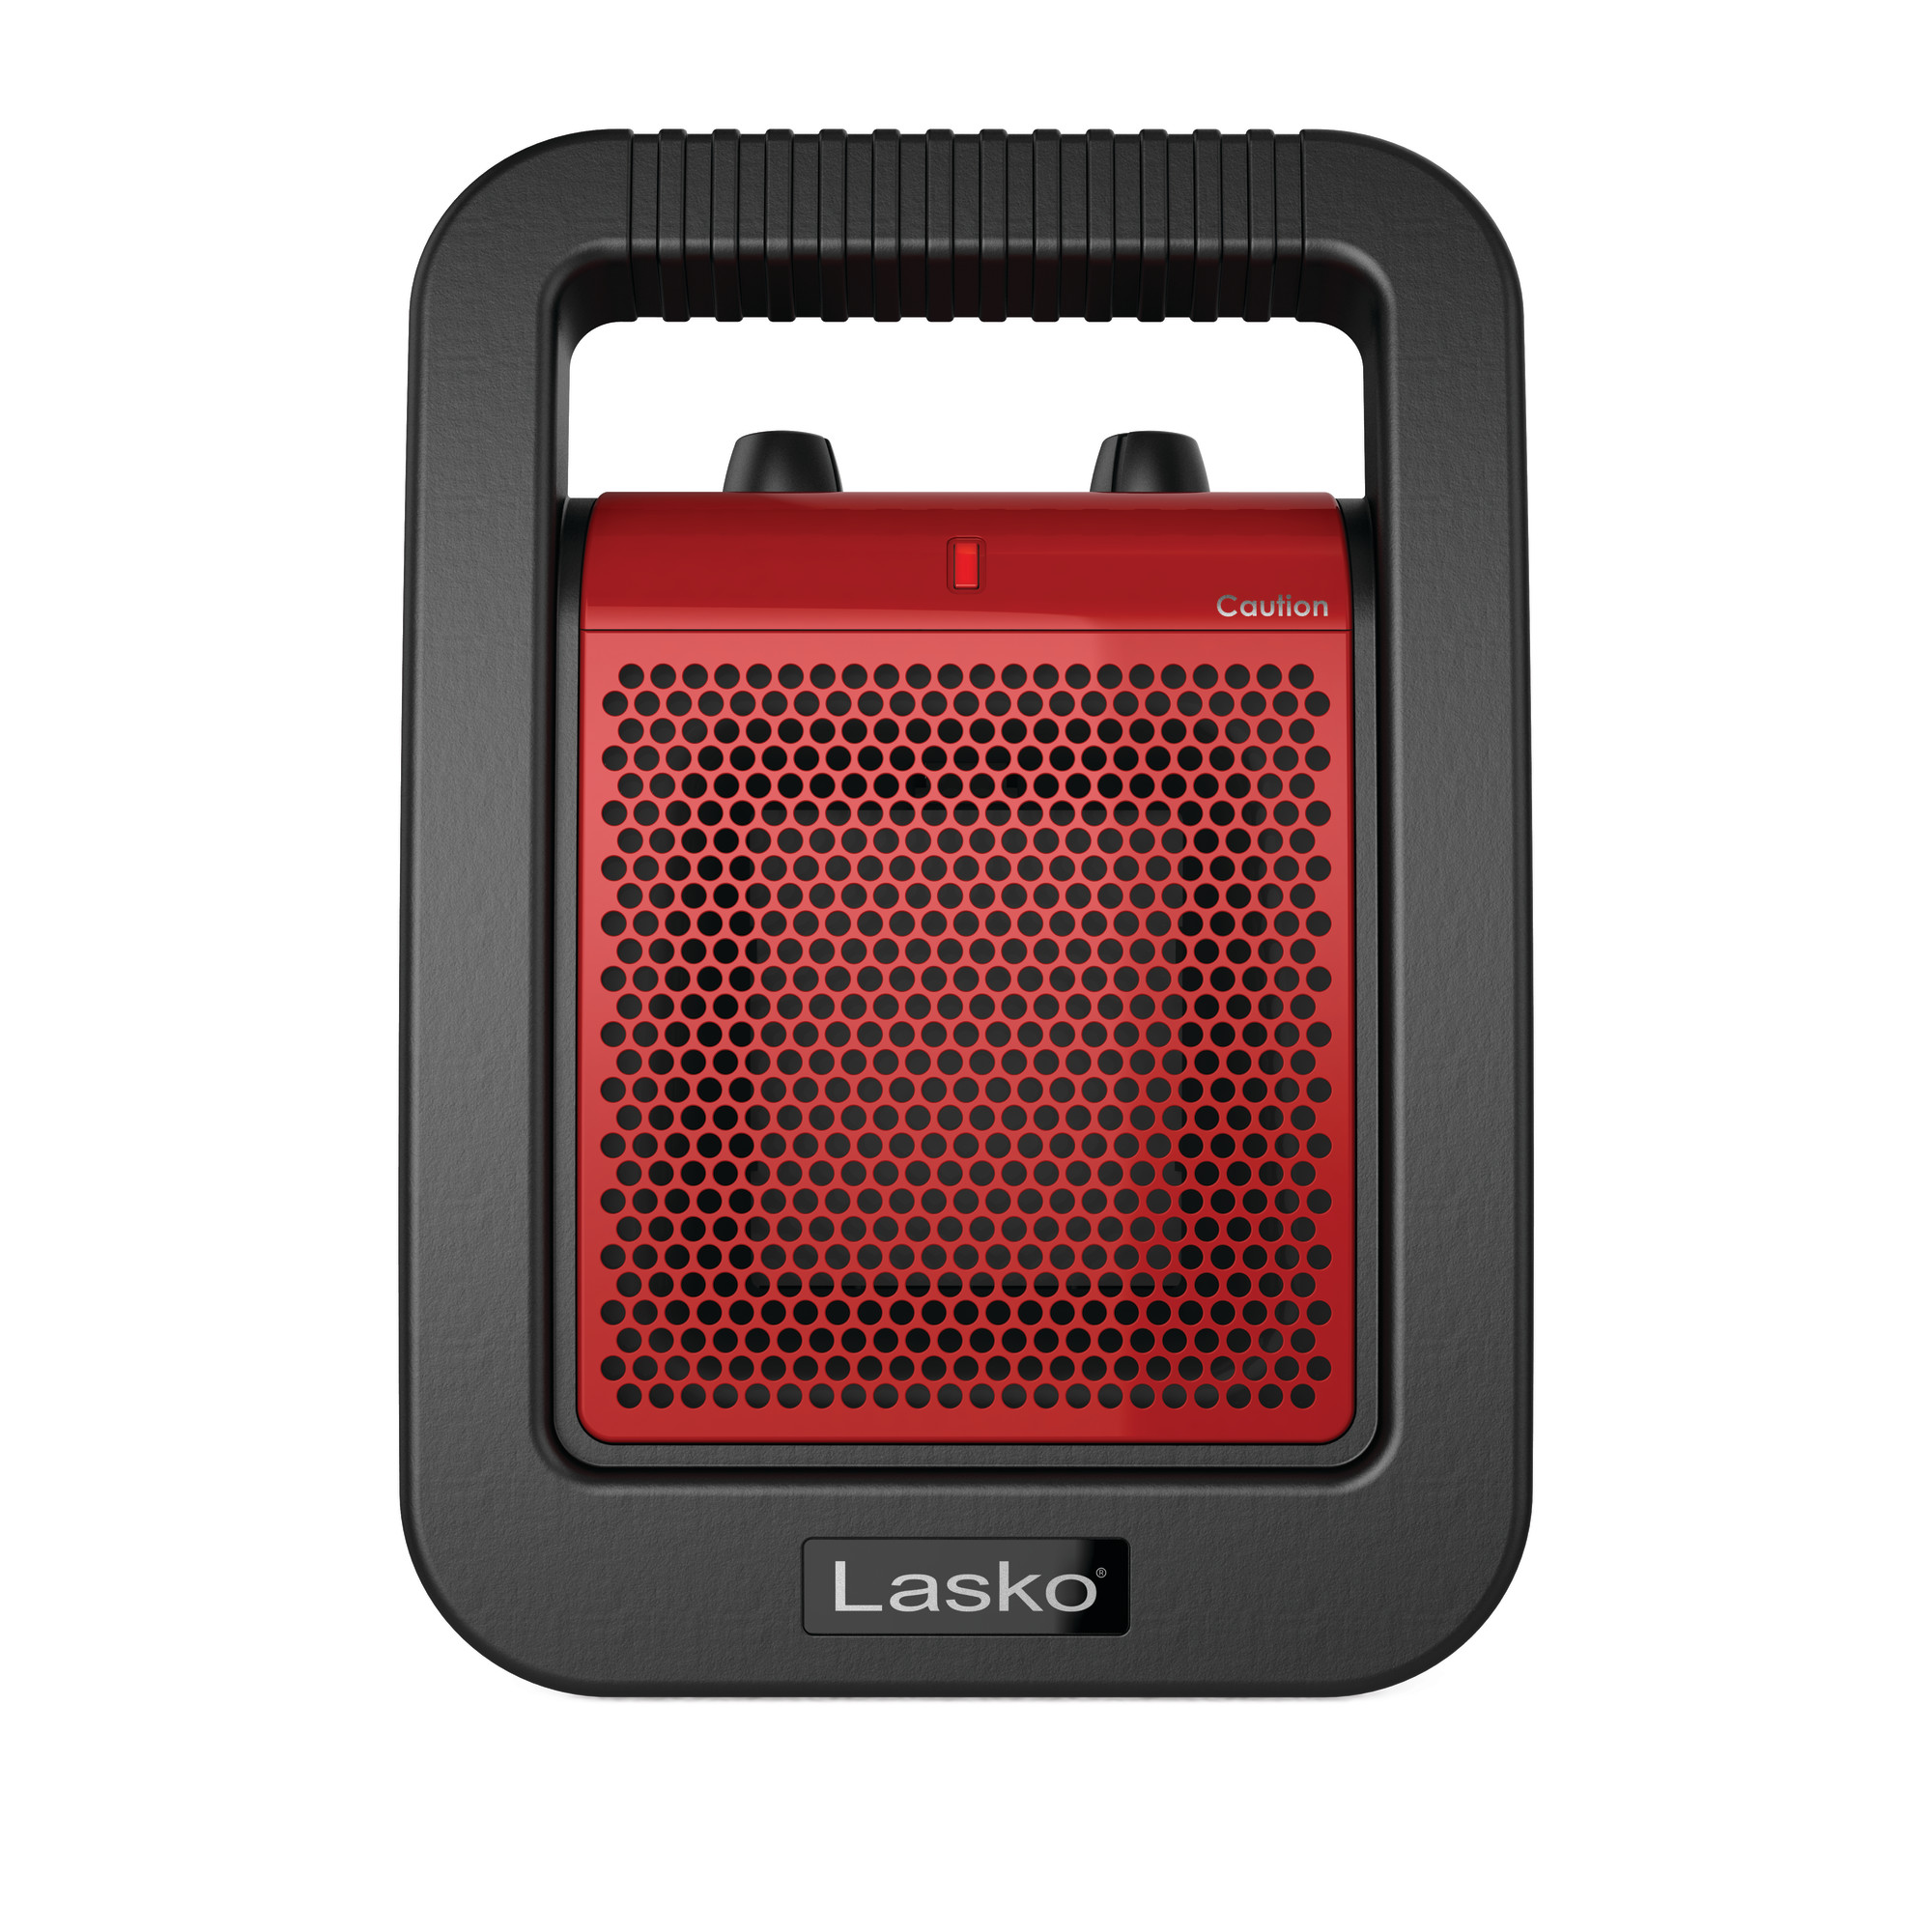 Lasko 12" Utility Ceramic Heater with Adjustable Thermostat, Black/Red, CU12110, New - image 2 of 5